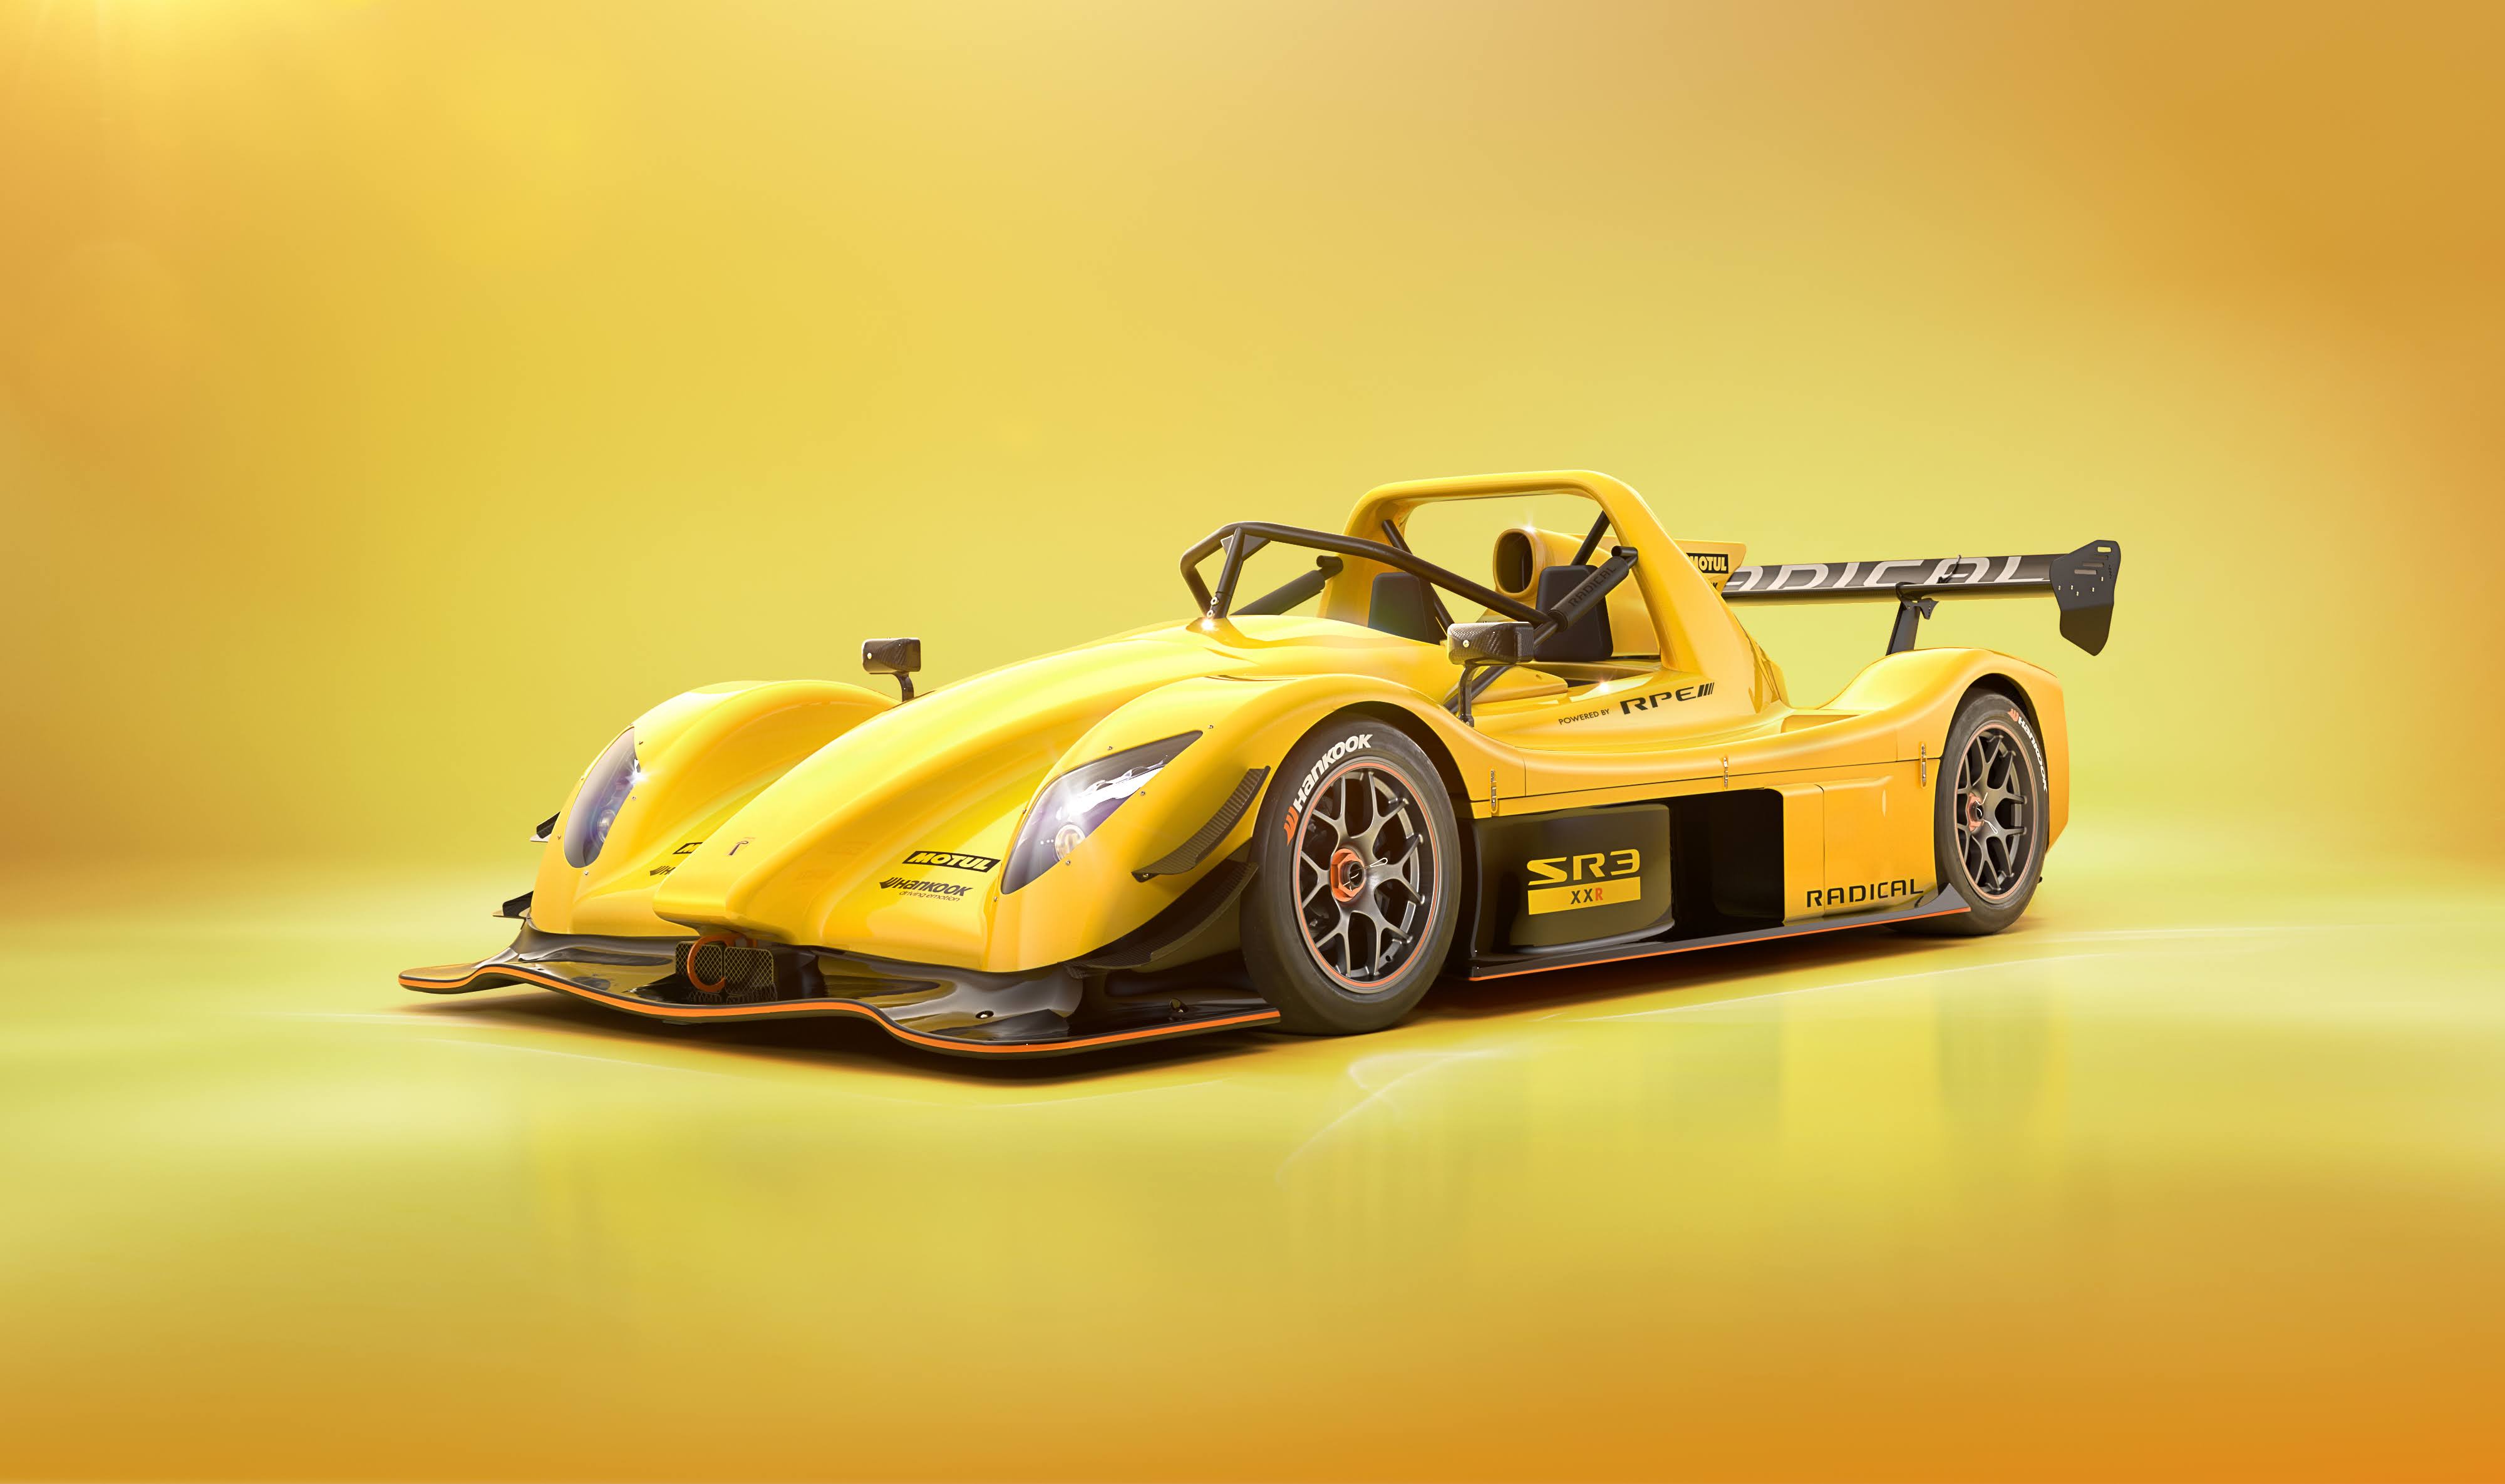 General 4000x2370 car vehicle motorsport yellow cars yellow background reflection race cars simple background minimalism frontal view Radical SR3 British cars